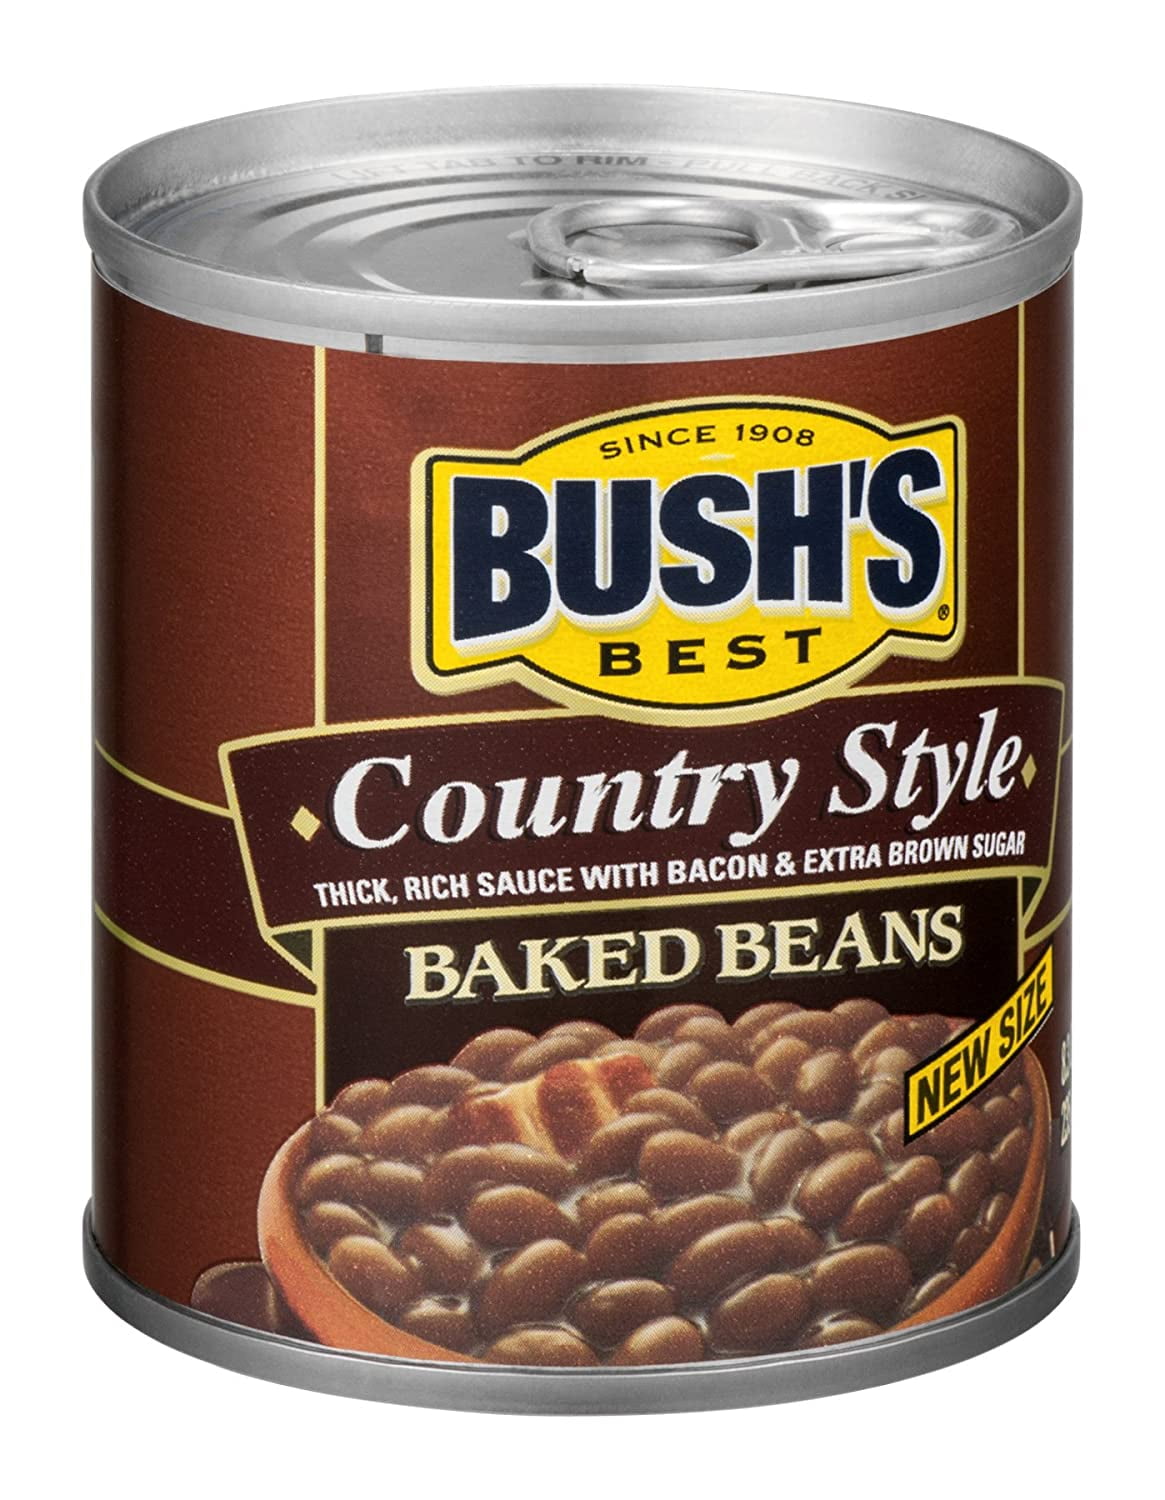 Some beans. Canned Beans. Canned Bush's Baked Beans. Baked Beans перевод. Can of Beans.